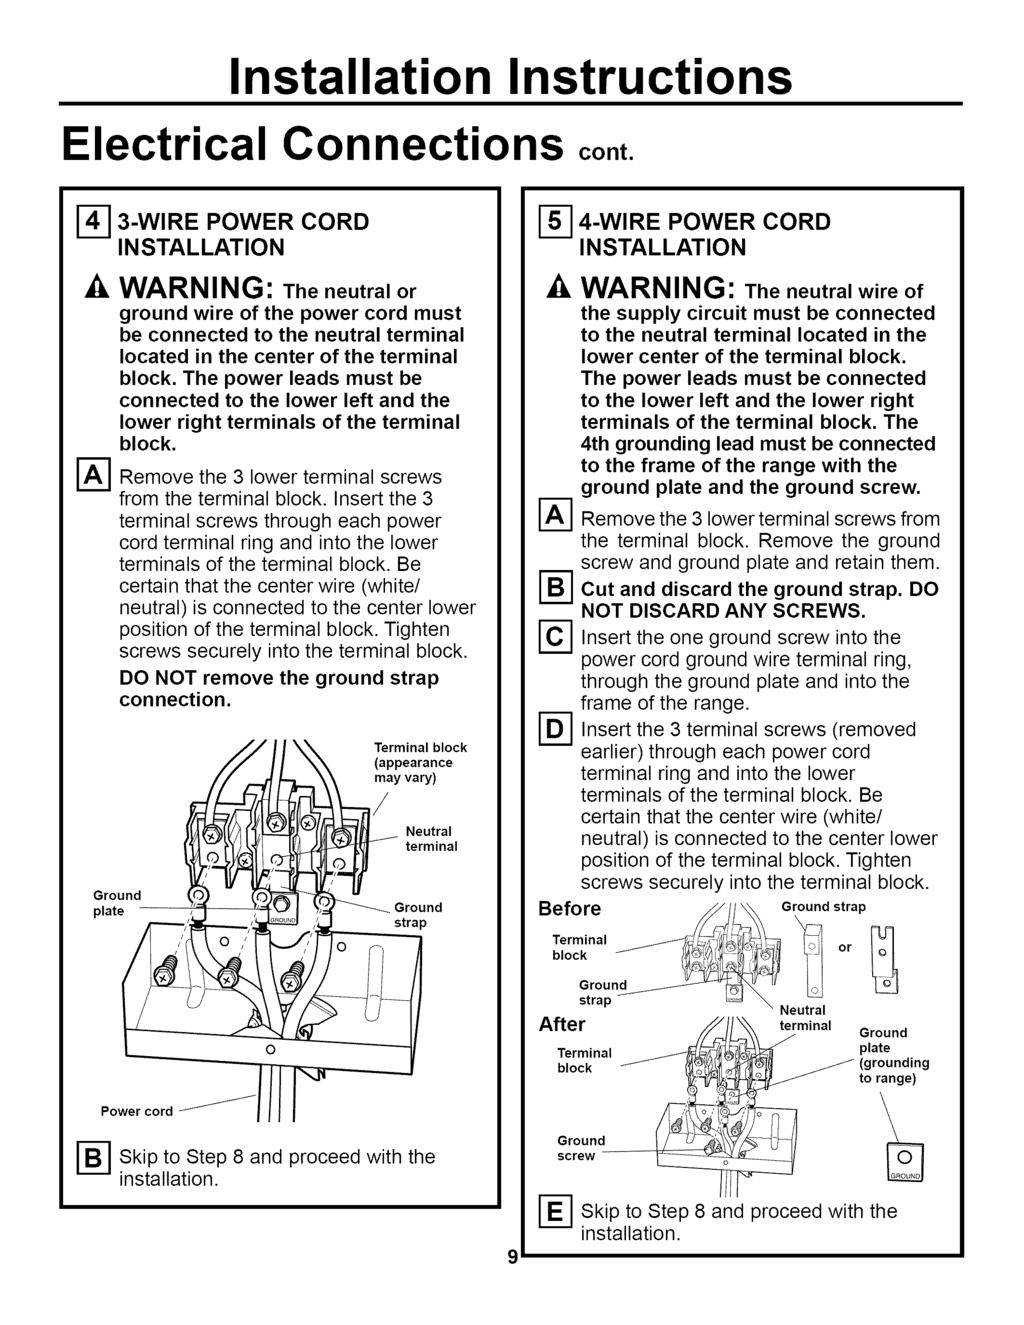 Electrical Connections cont.